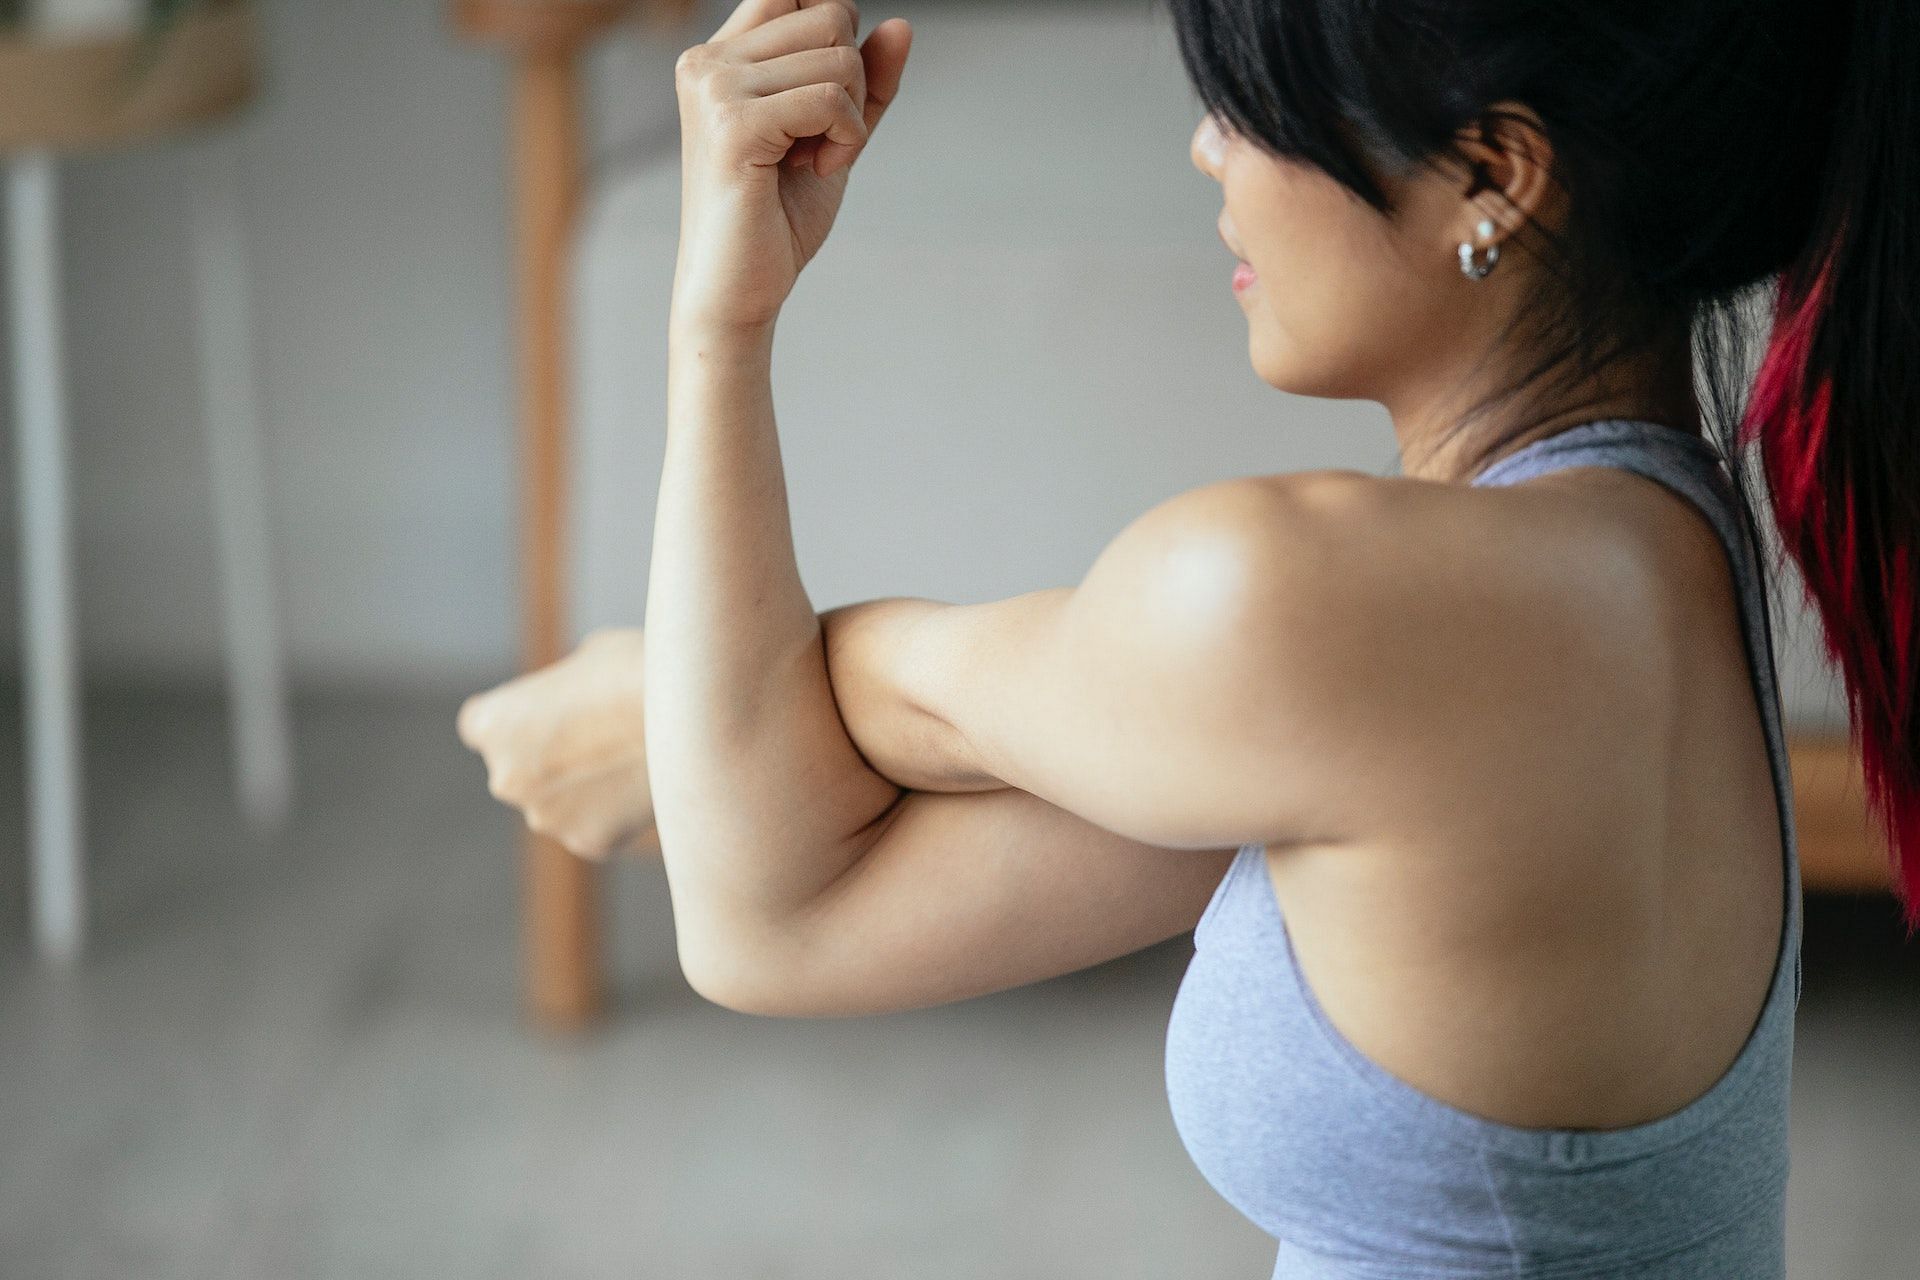 Stretching the arms are great for easing neck and shoulder tightness. (Photo via Pexels/Miriam Alonso)